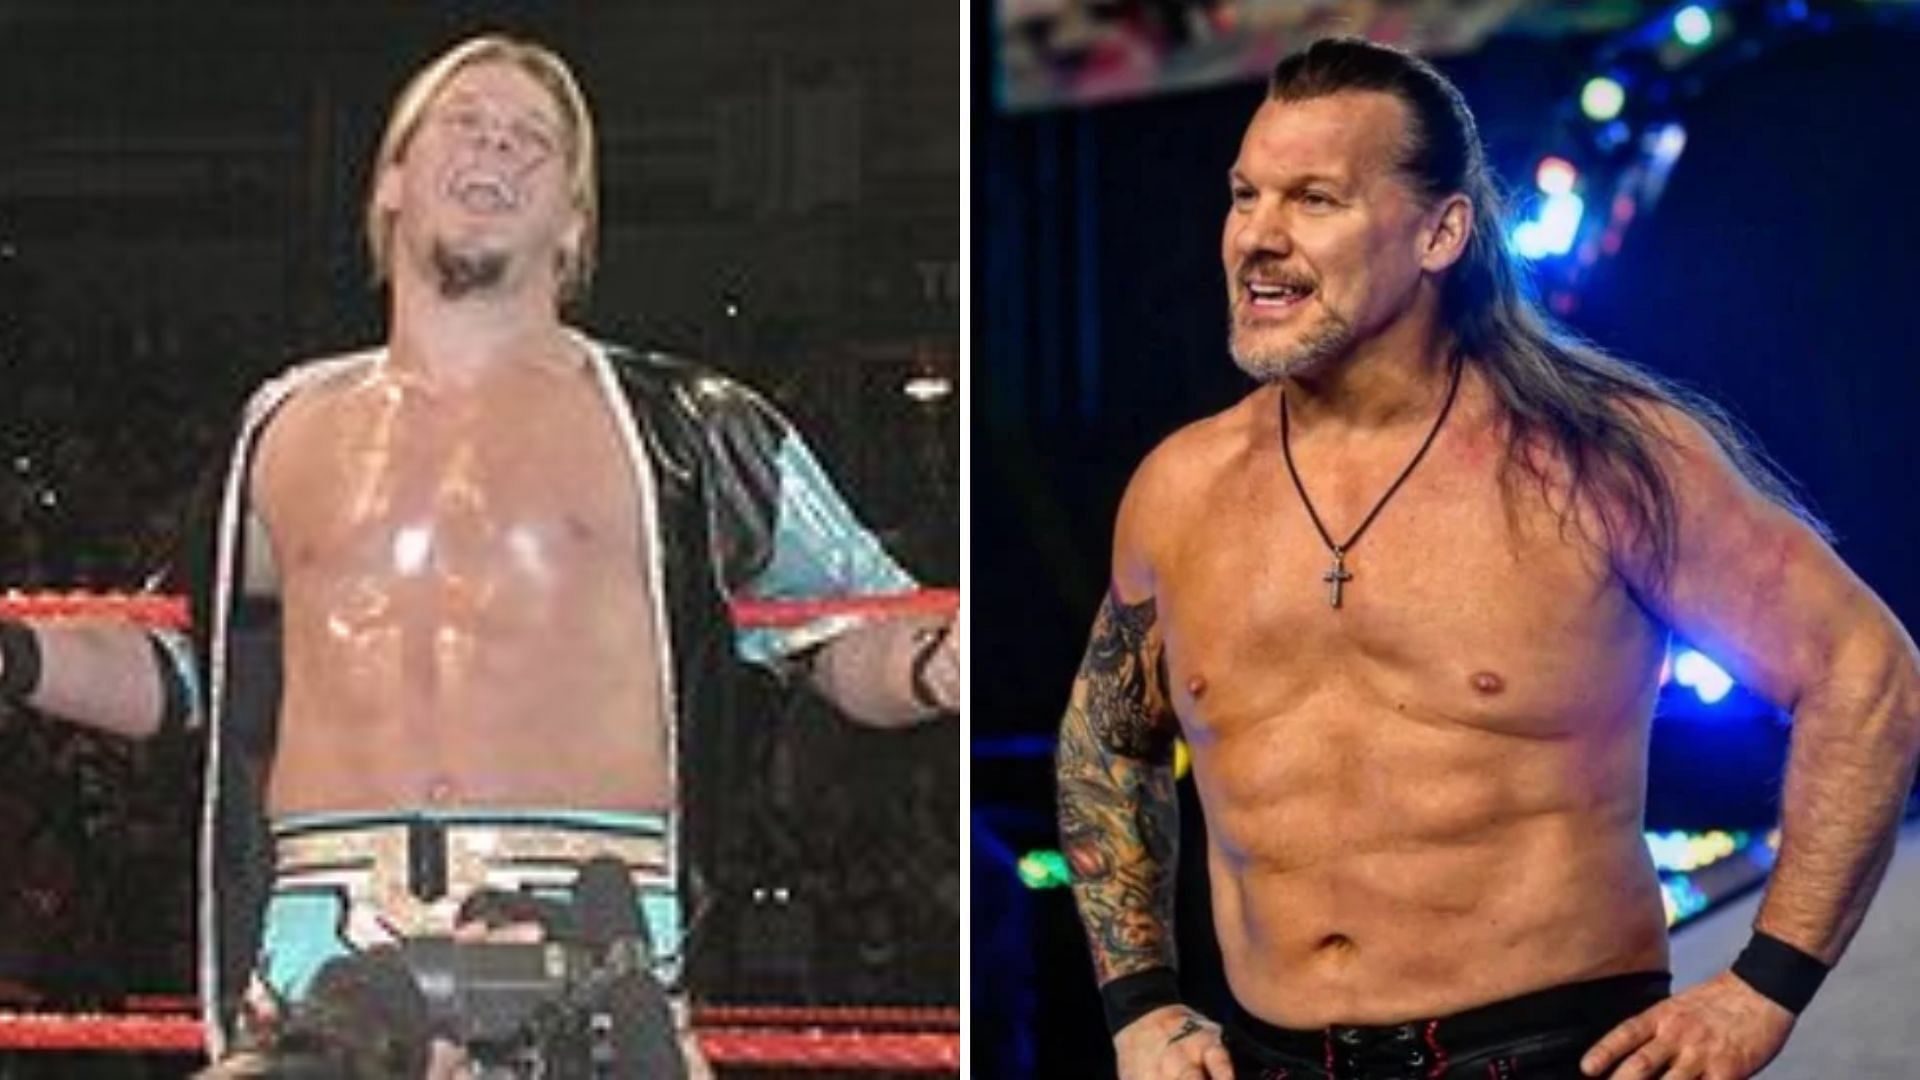 Chris Jericho still pulls off high quality matches in 2022